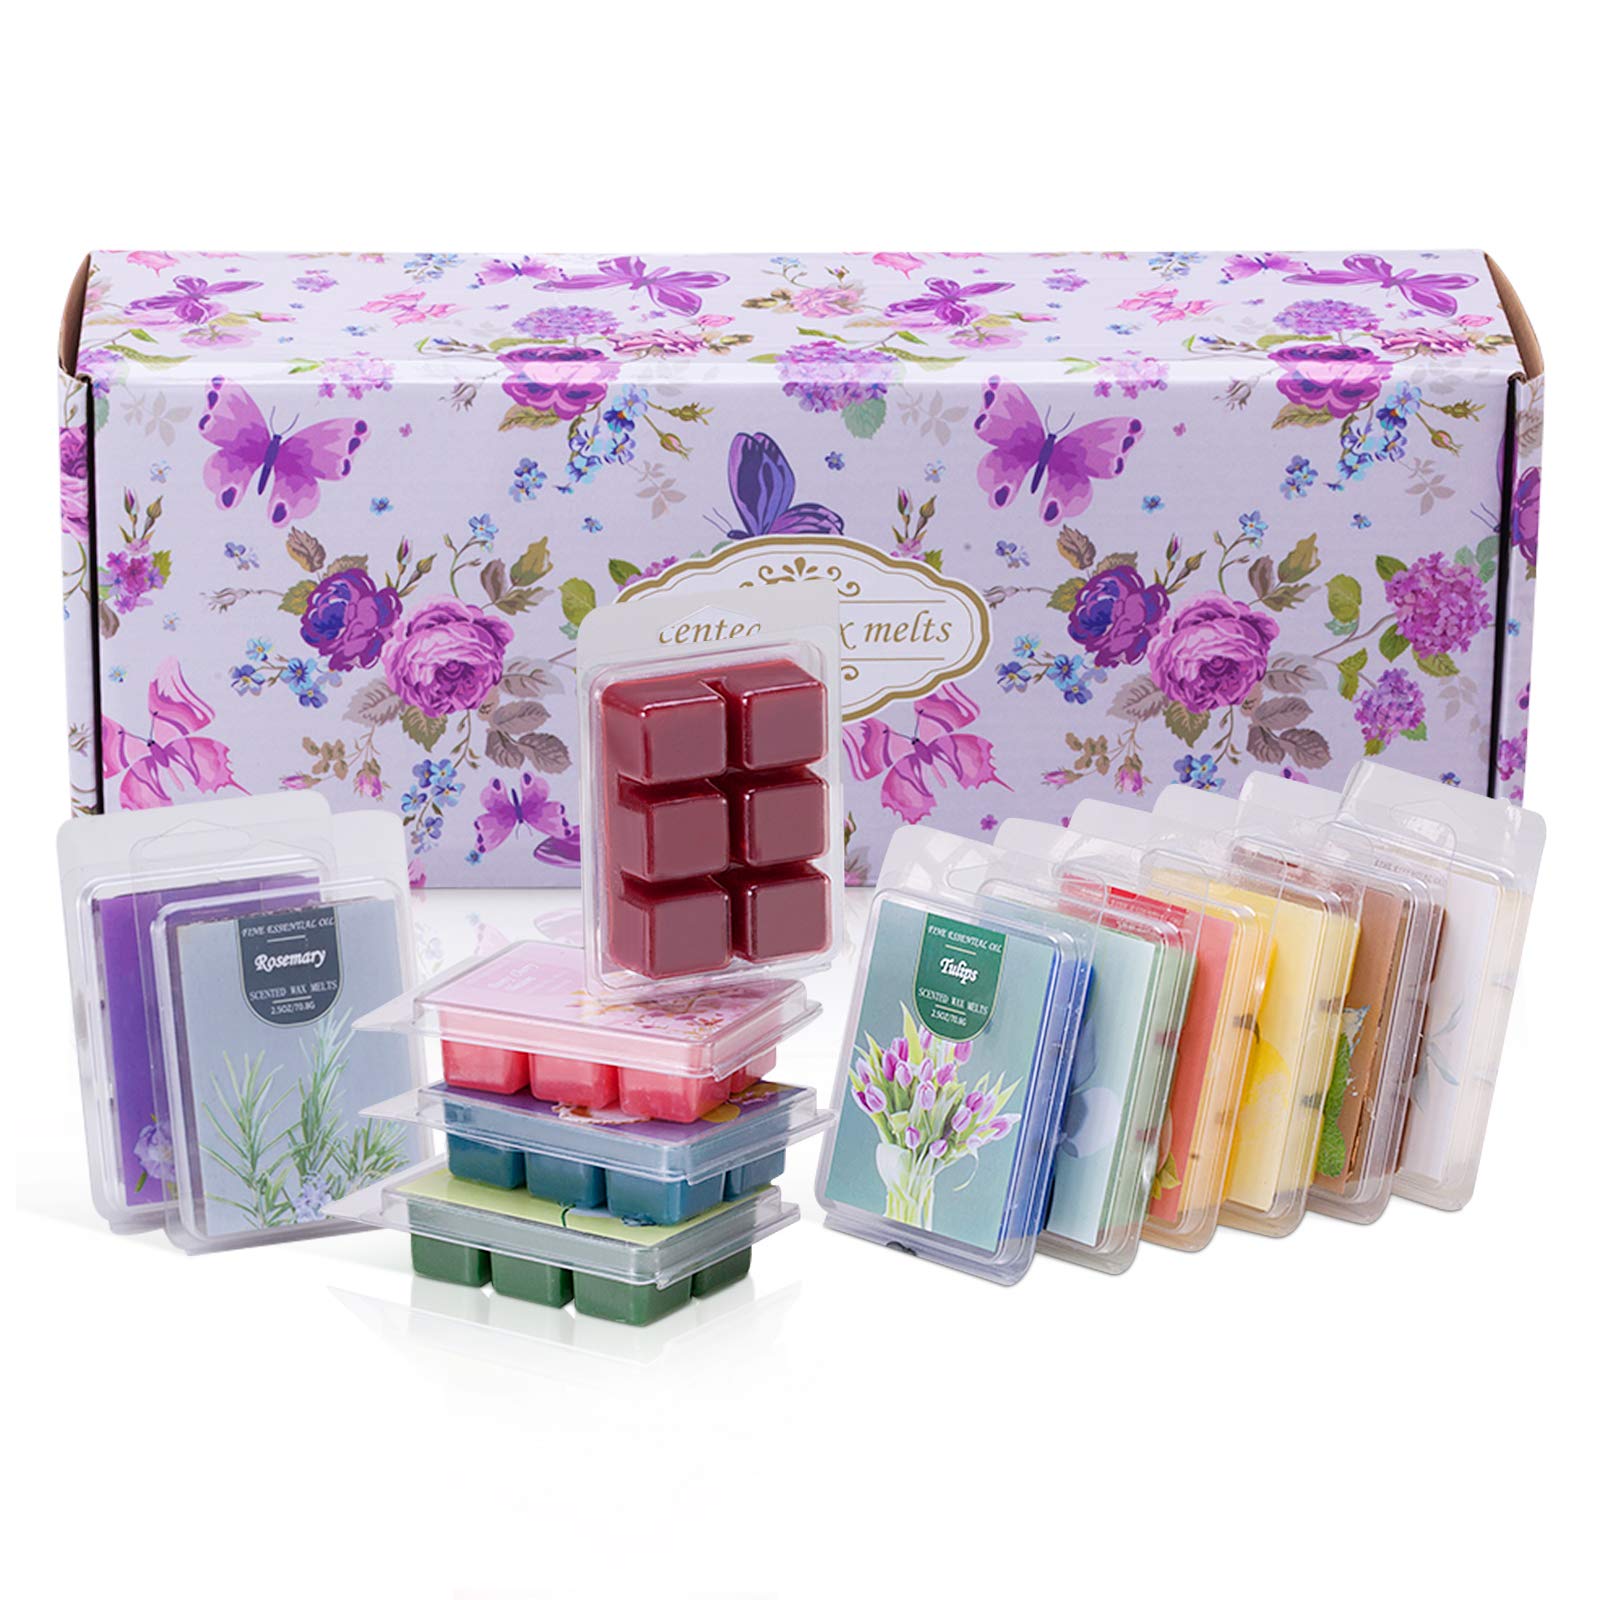 Scented Soy Wax Melts  Set of 12 Assorted 2.5oz Wax Cubes/Tarts